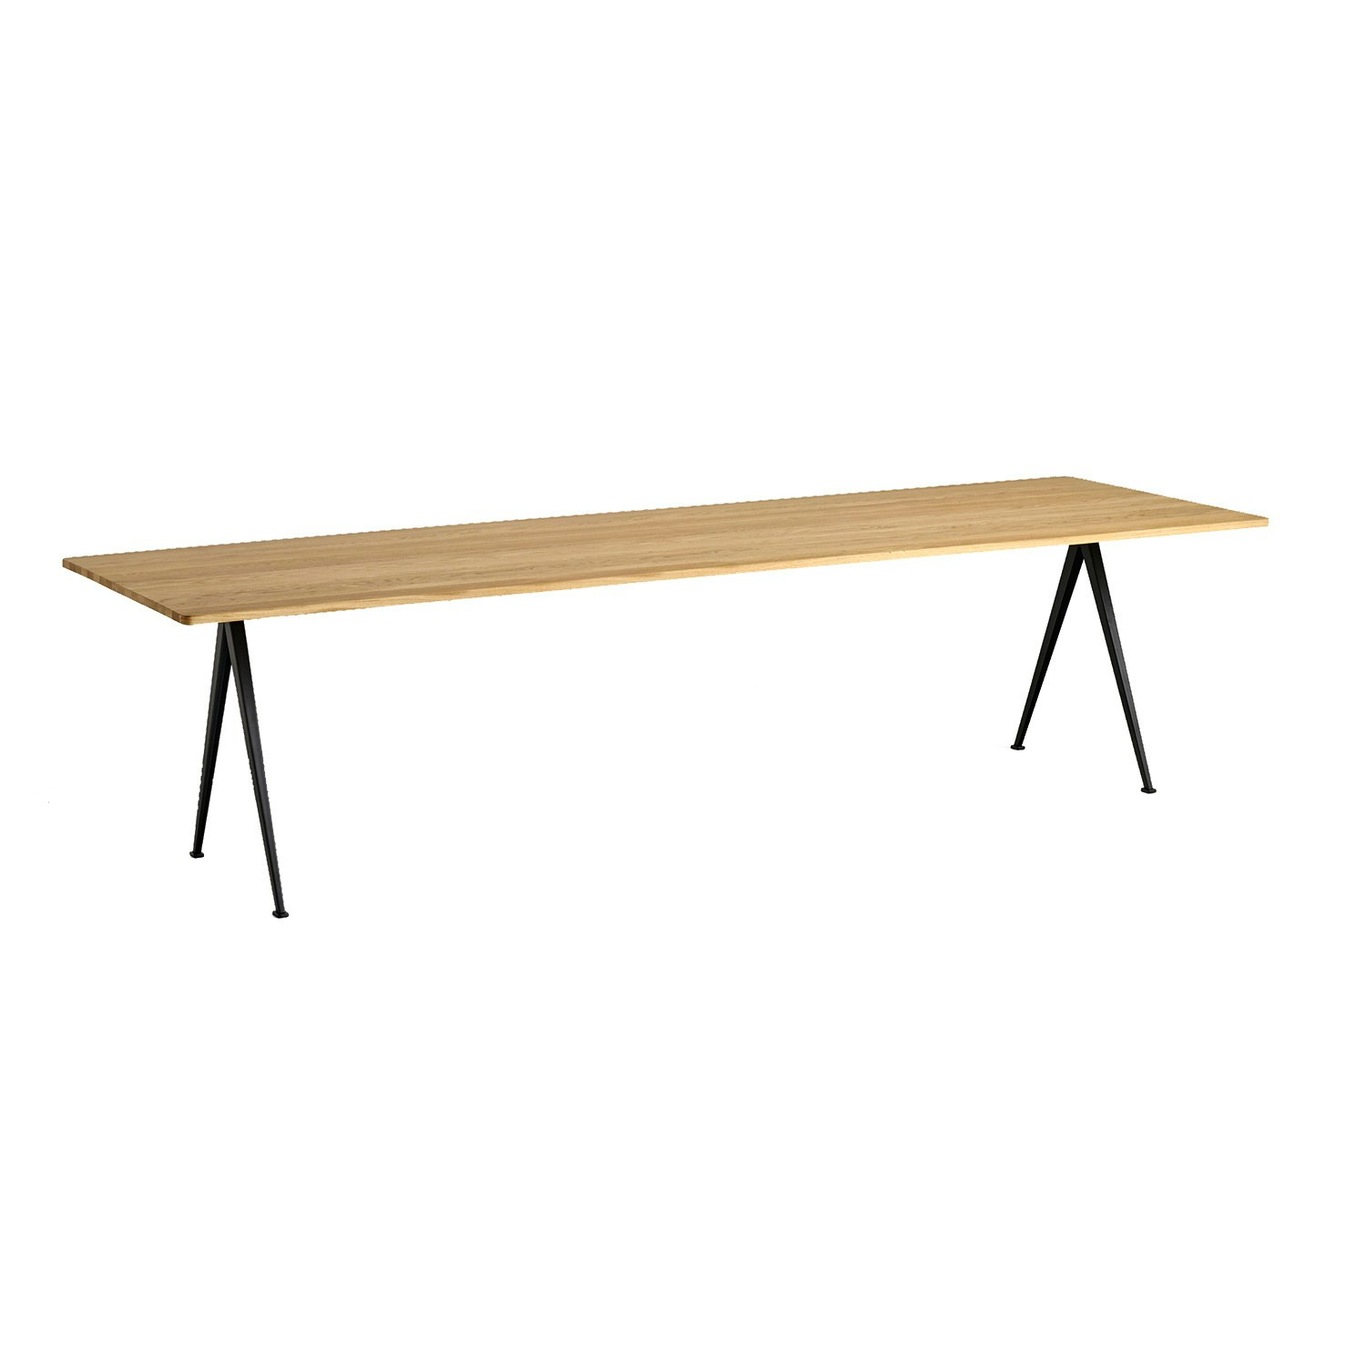 Pyramid 02 Dining Table 85x300 cm, Black / Lacquered Oak